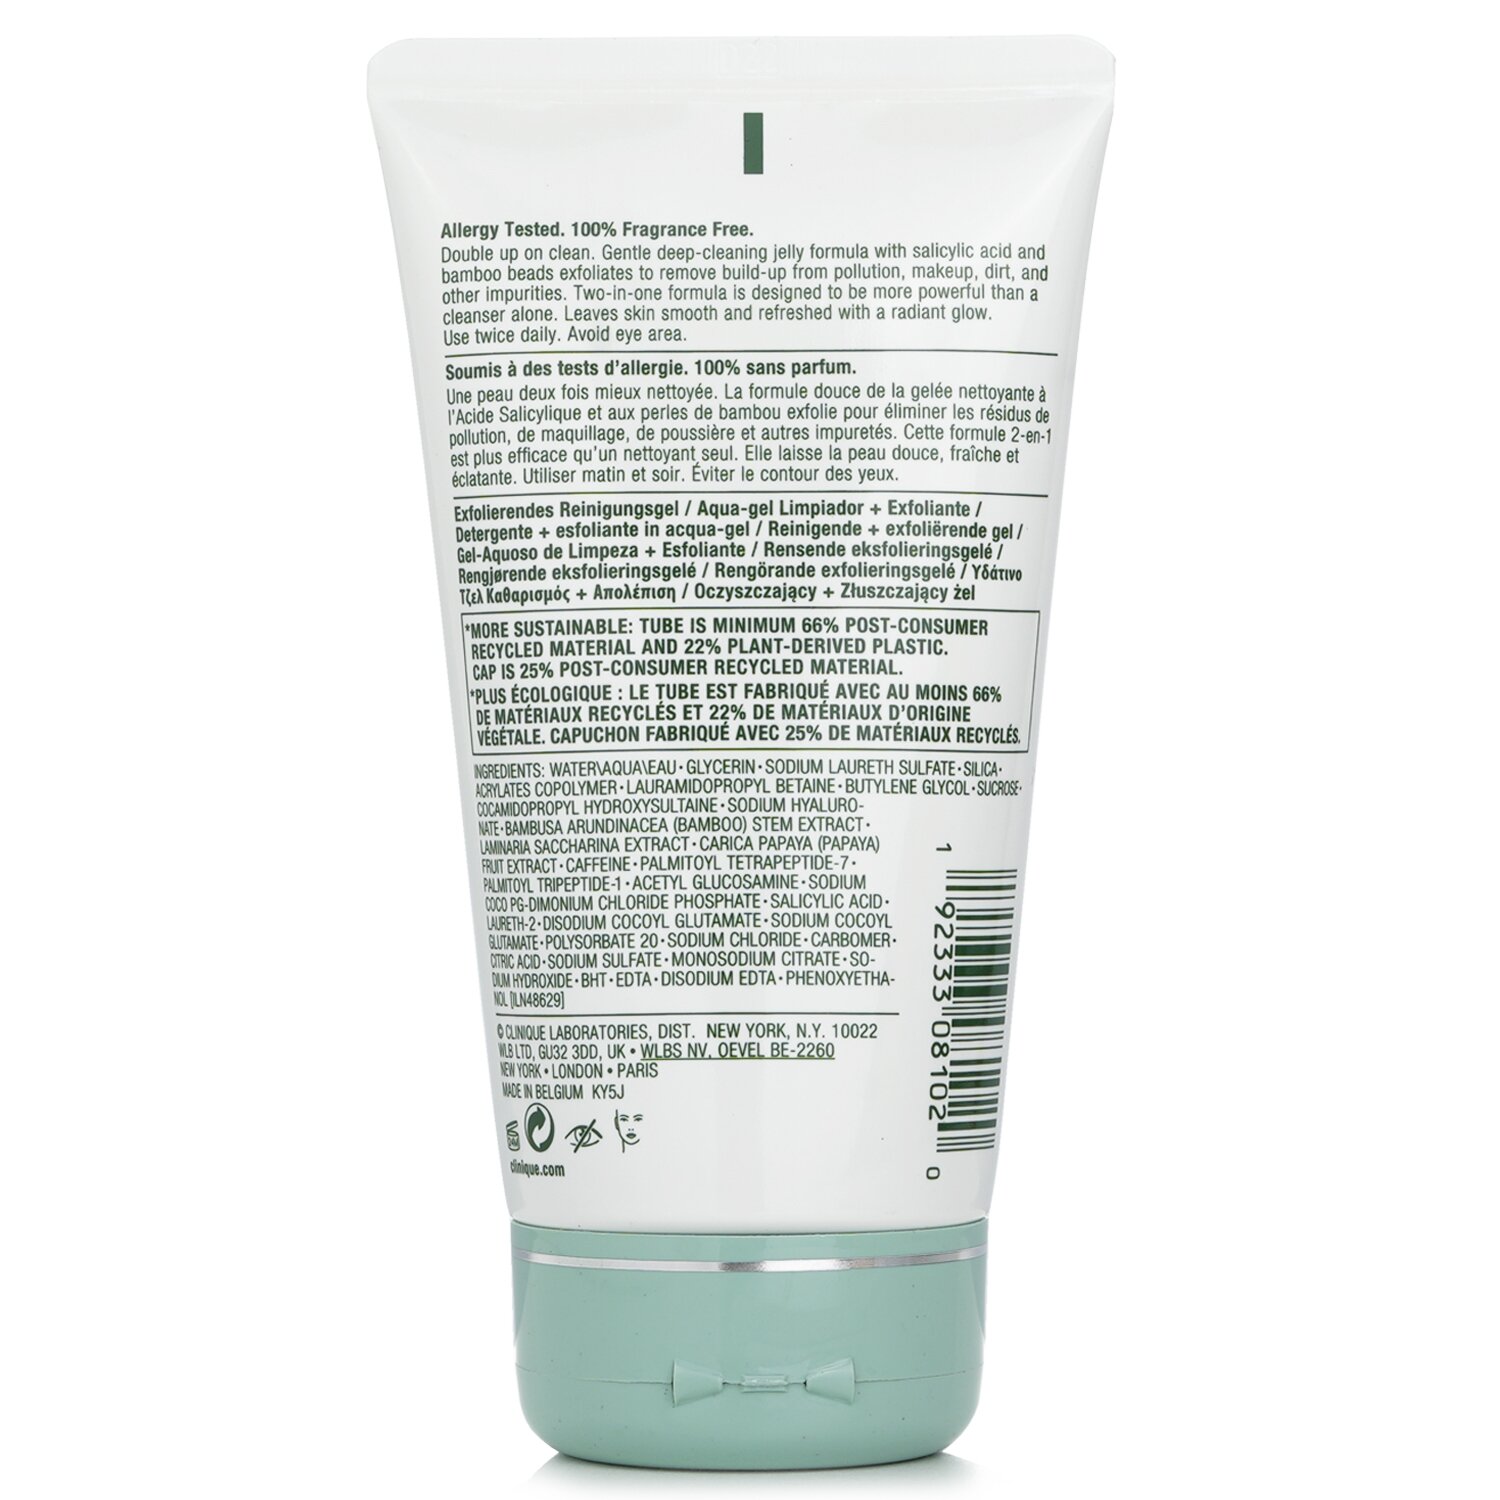 Clinique All About Clean 2-In-1 Cleansing + Exfoliating Jelly 150ml/5oz